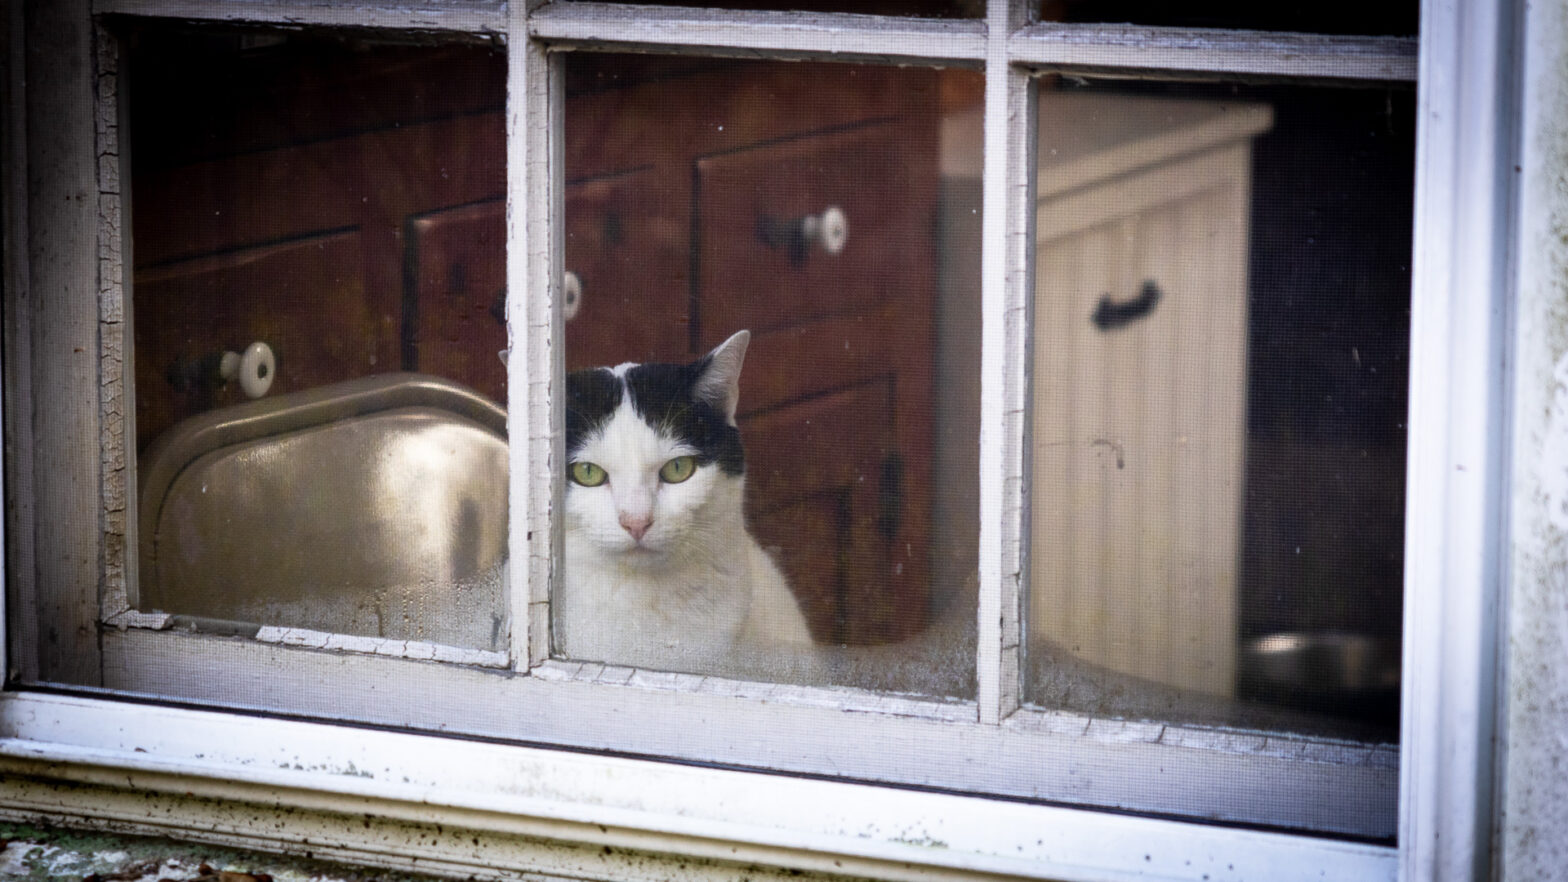 This is VERY Serious Business – Cat in Window